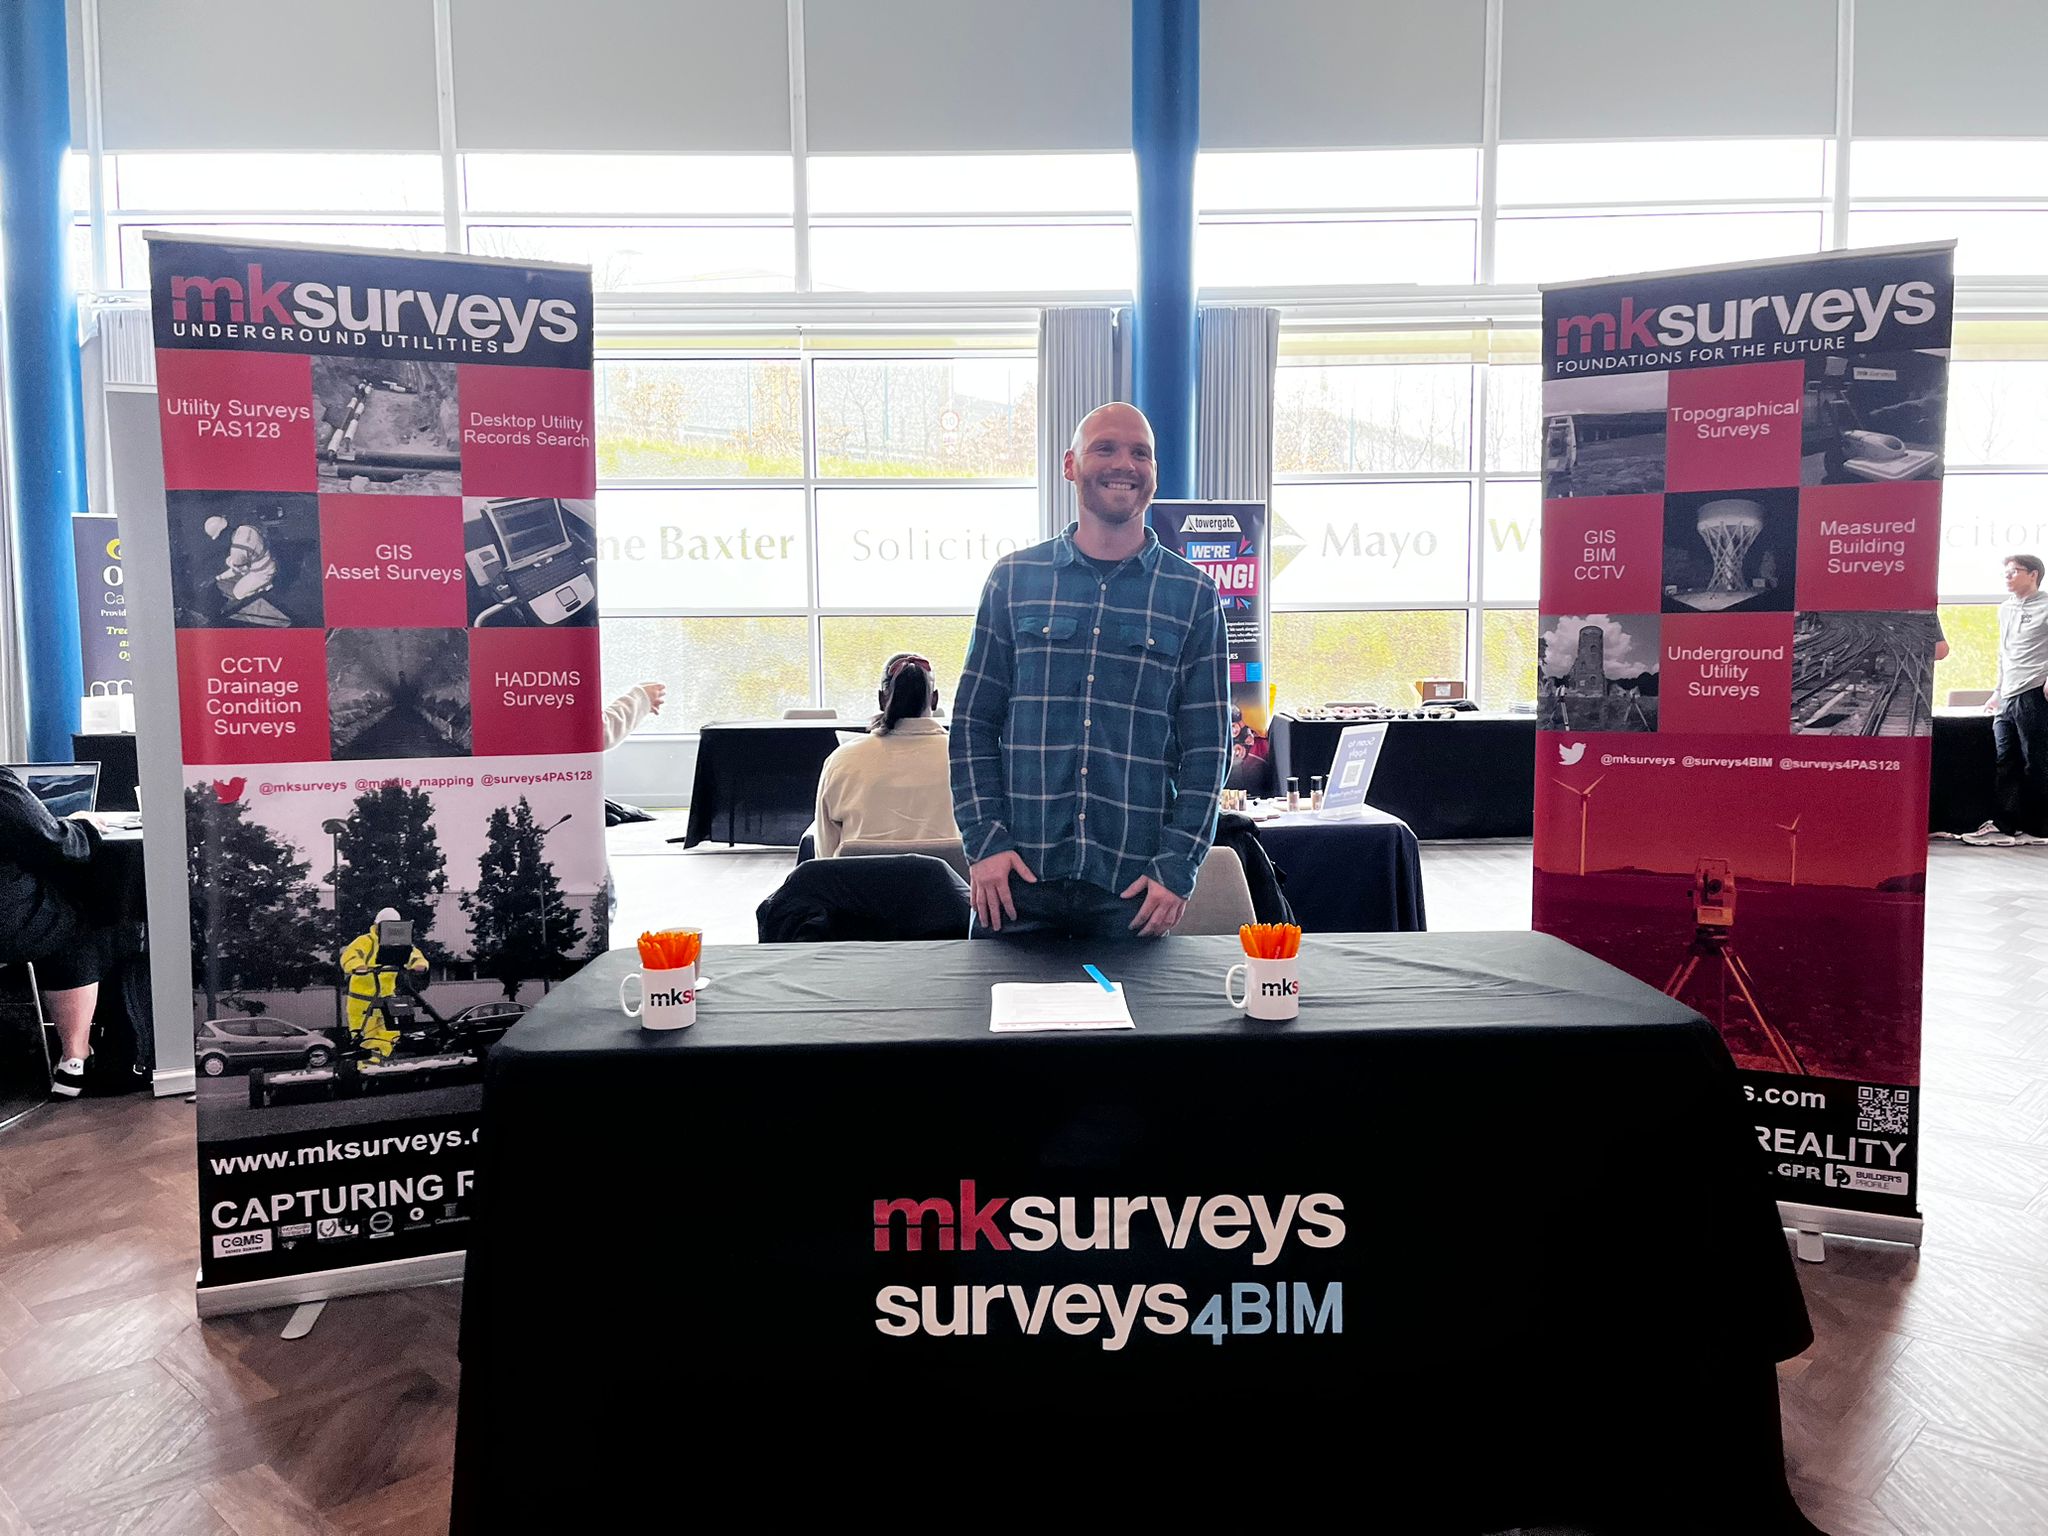 MK Surveys at our event in Brighton & Hove